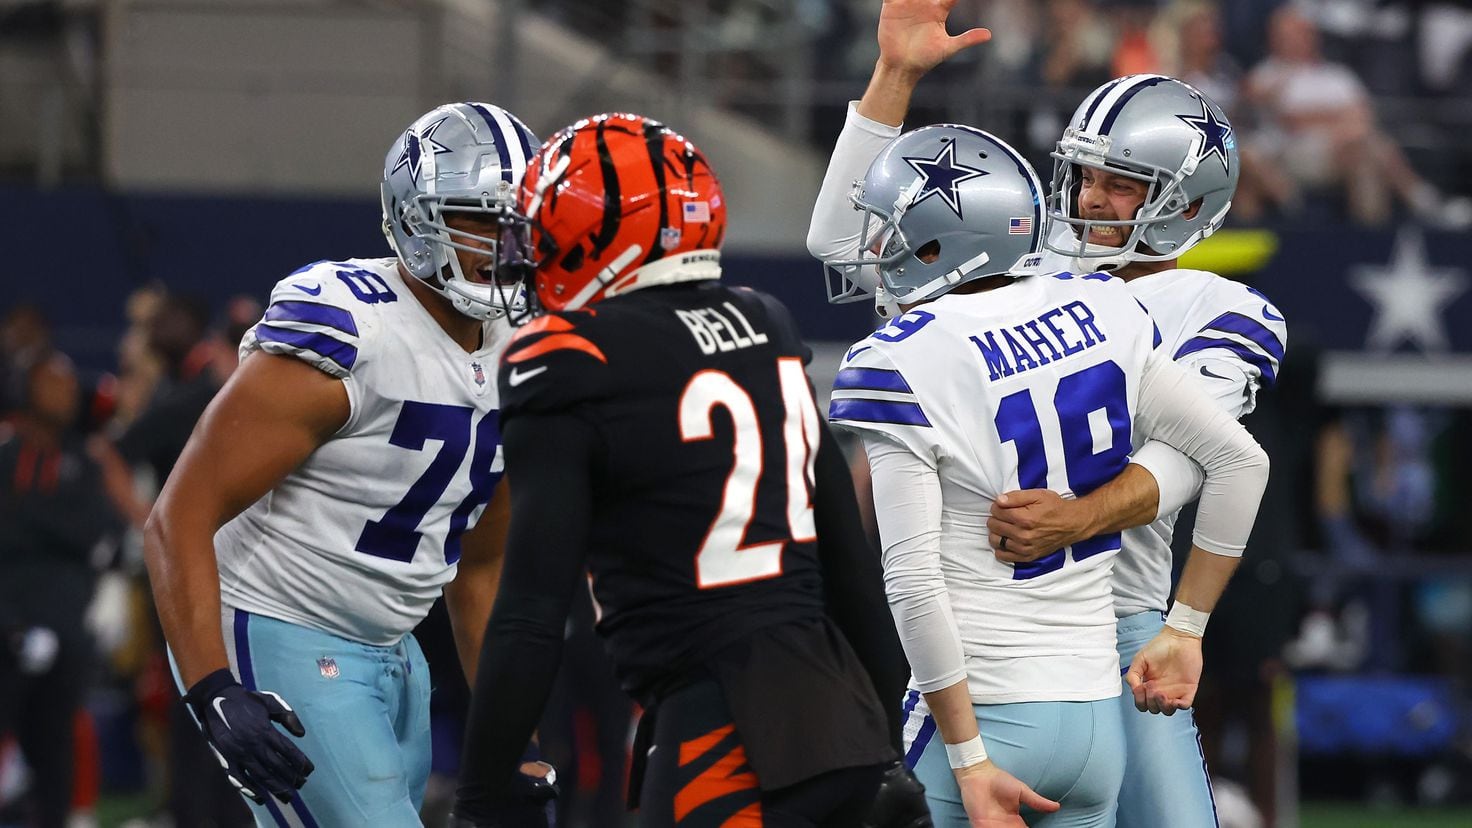 Bengals vs Cowboys live stream is today: How to watch the NFL week